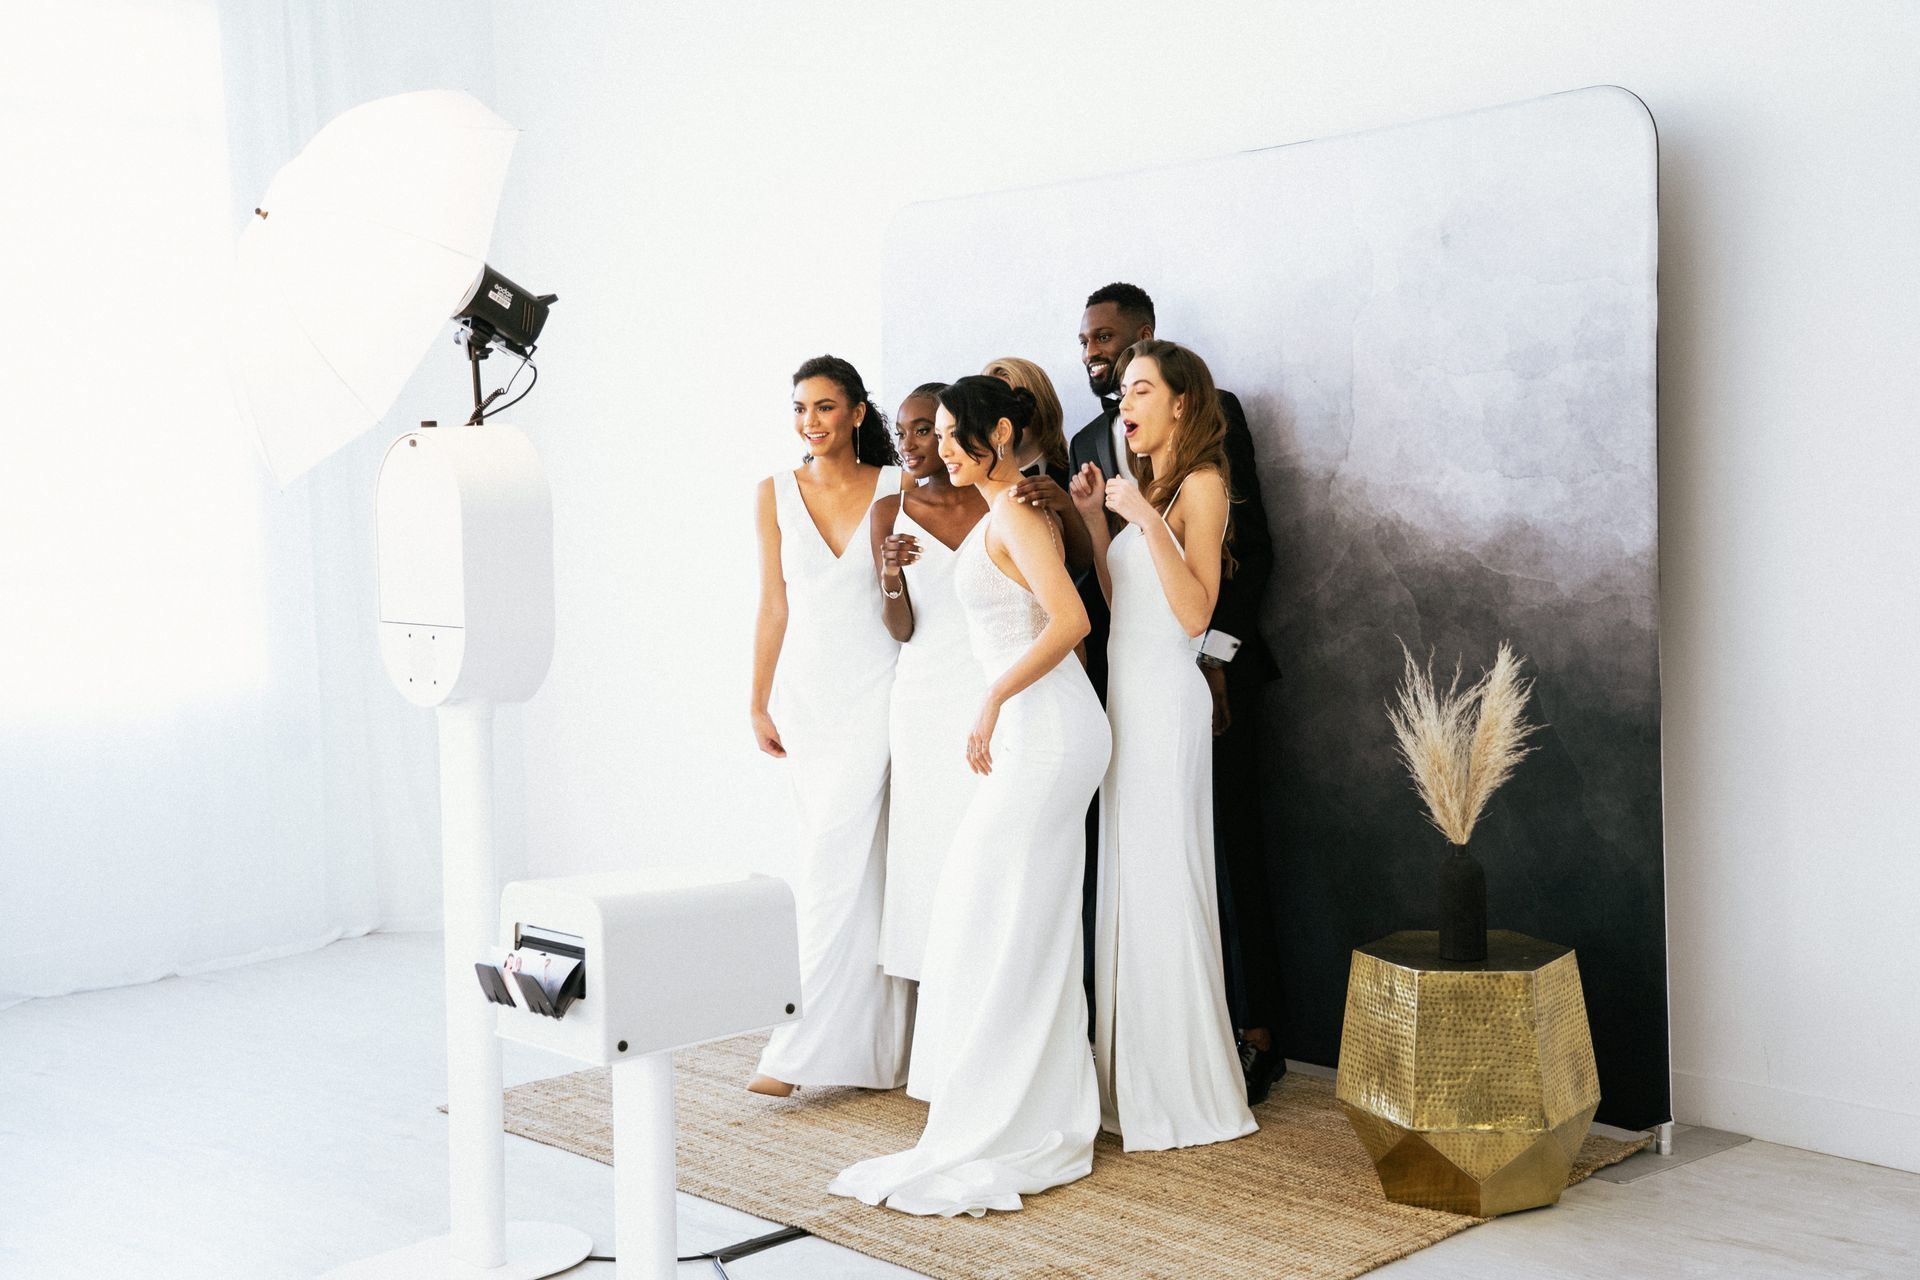 A group of women in white dresses are posing for a picture in front of a photo booth